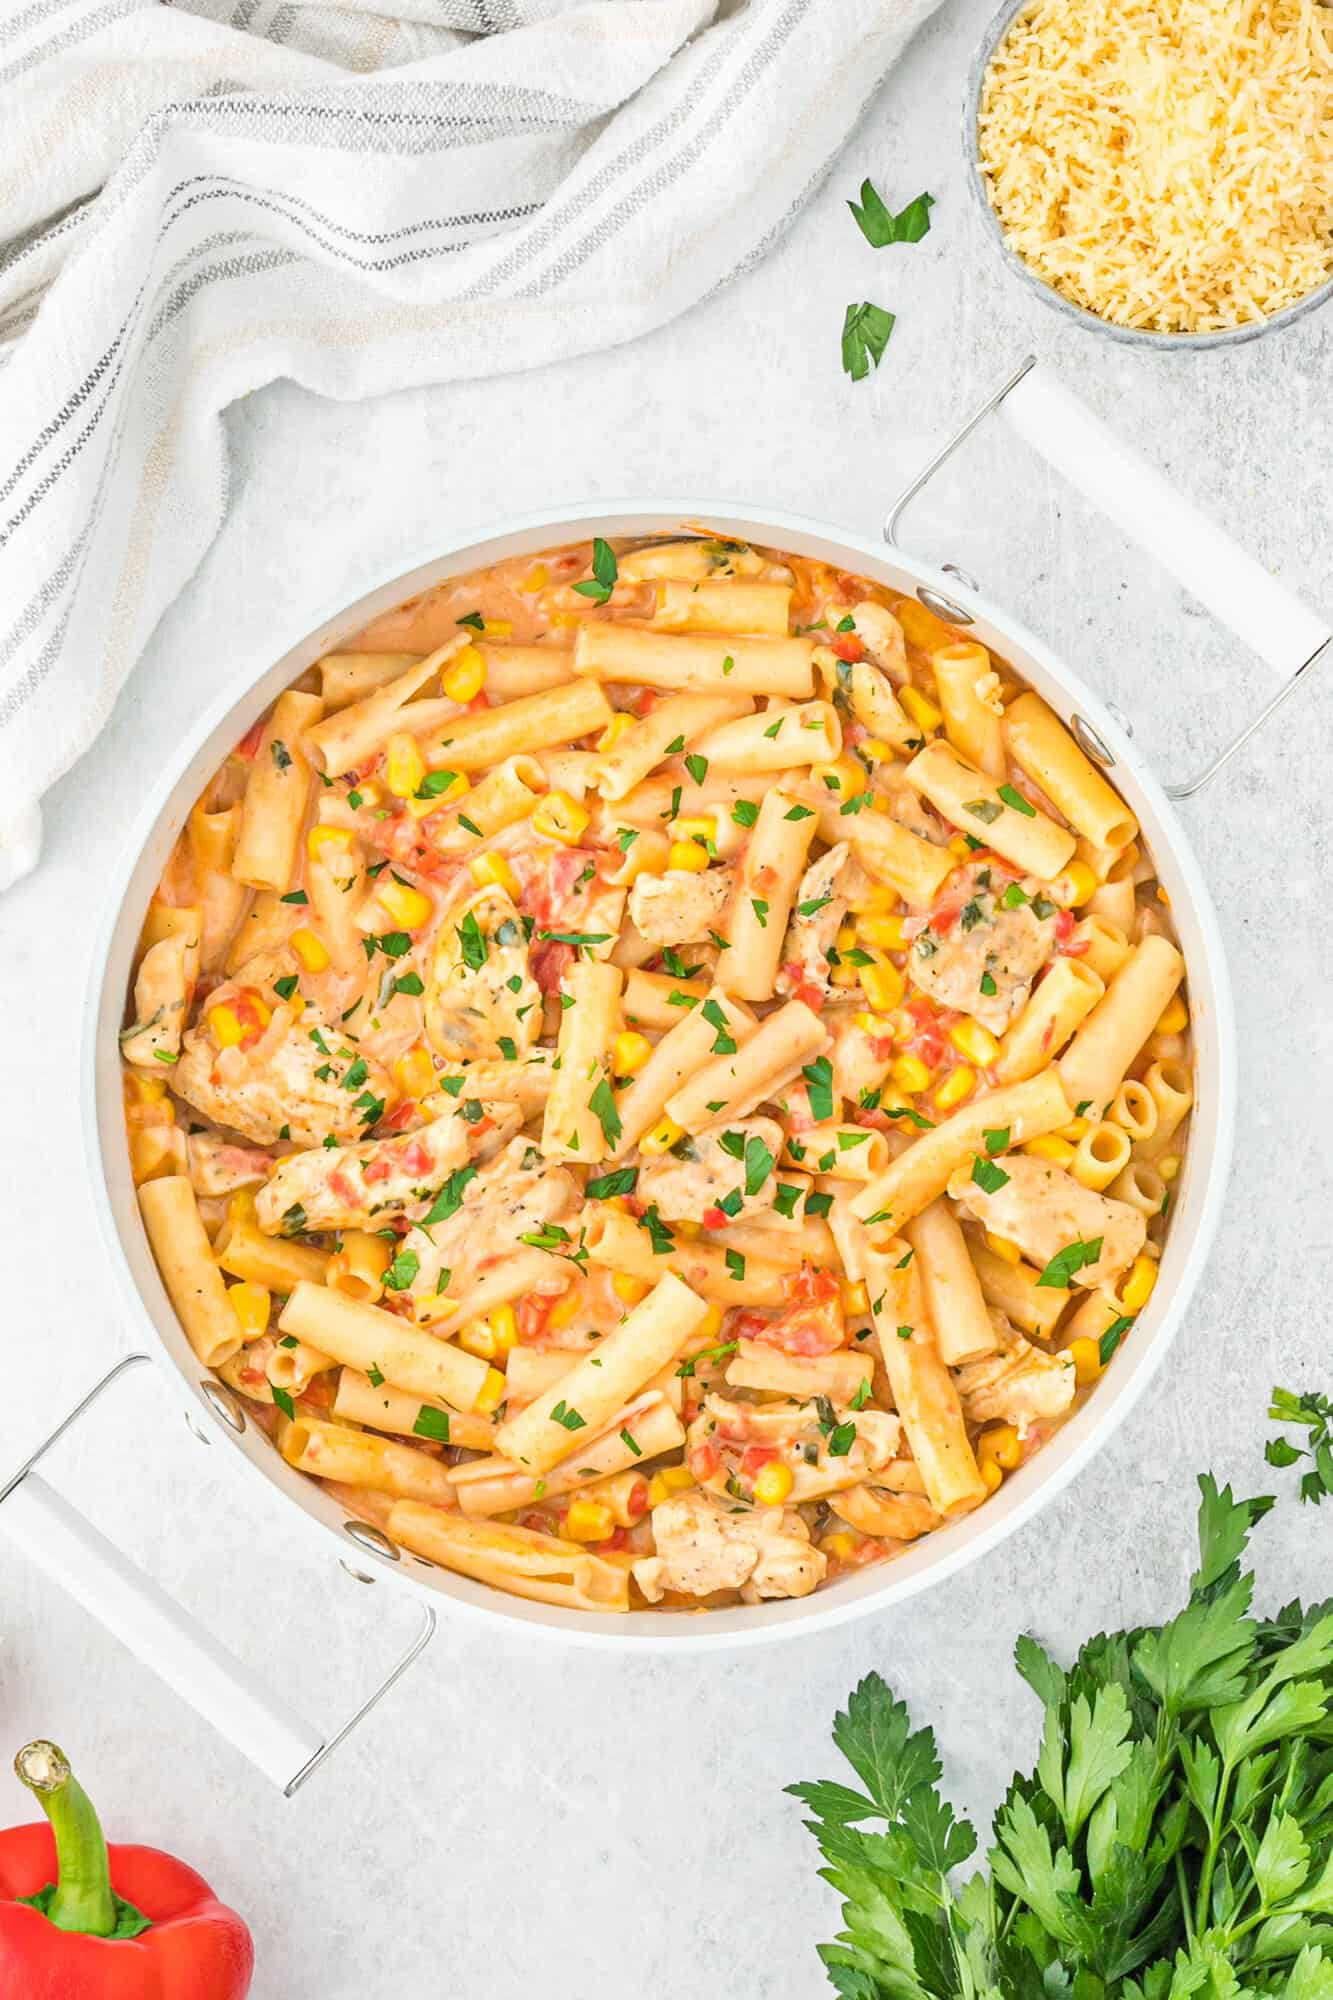 Overhead view of a bowl of Cajun chicken pasta surrounded by various ingredients.